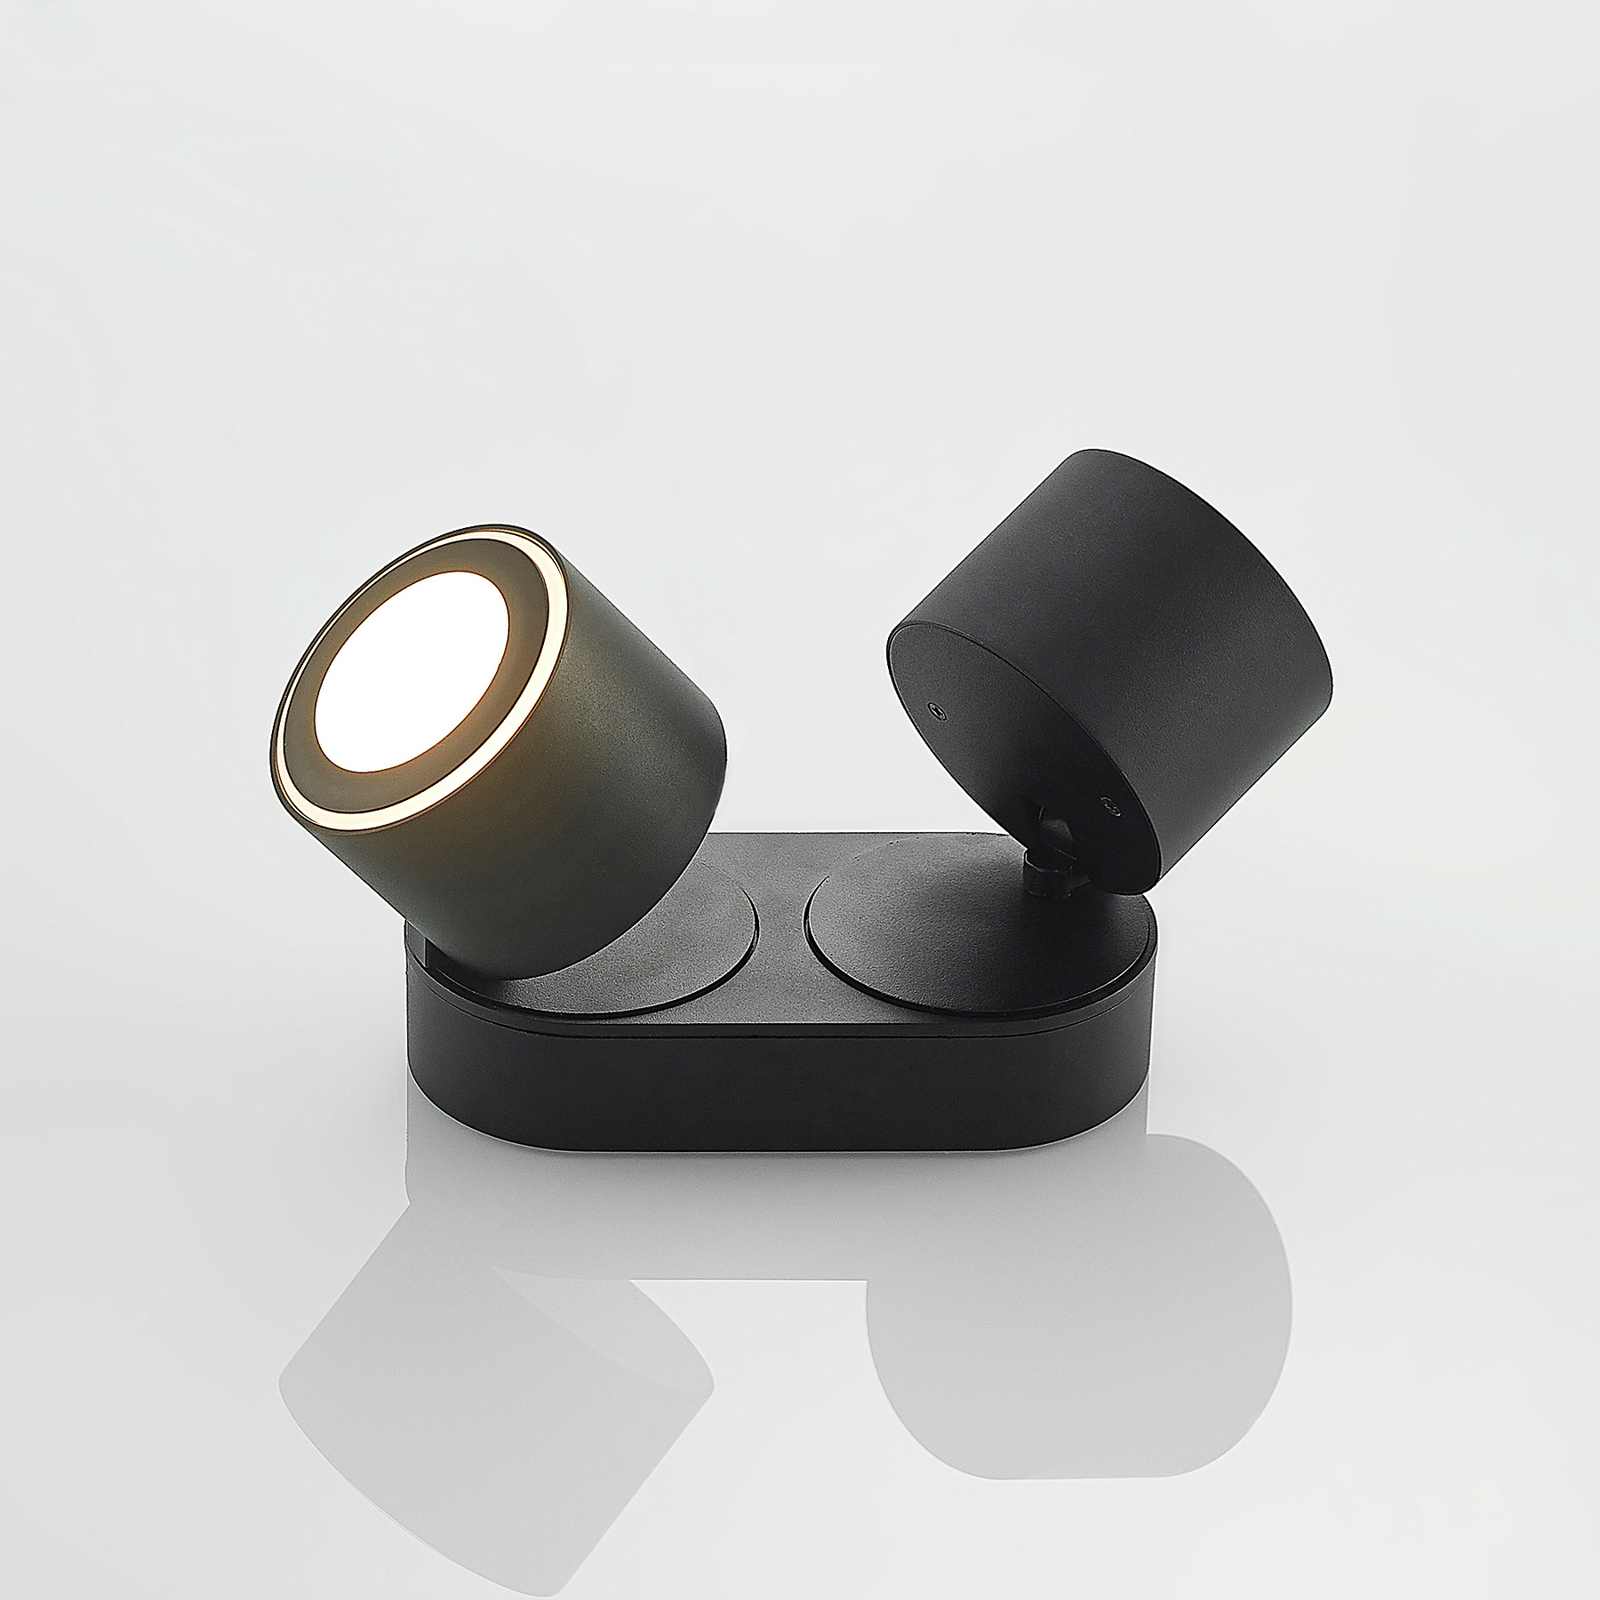 Lindby Lowie foco LED, 2 luces, negro